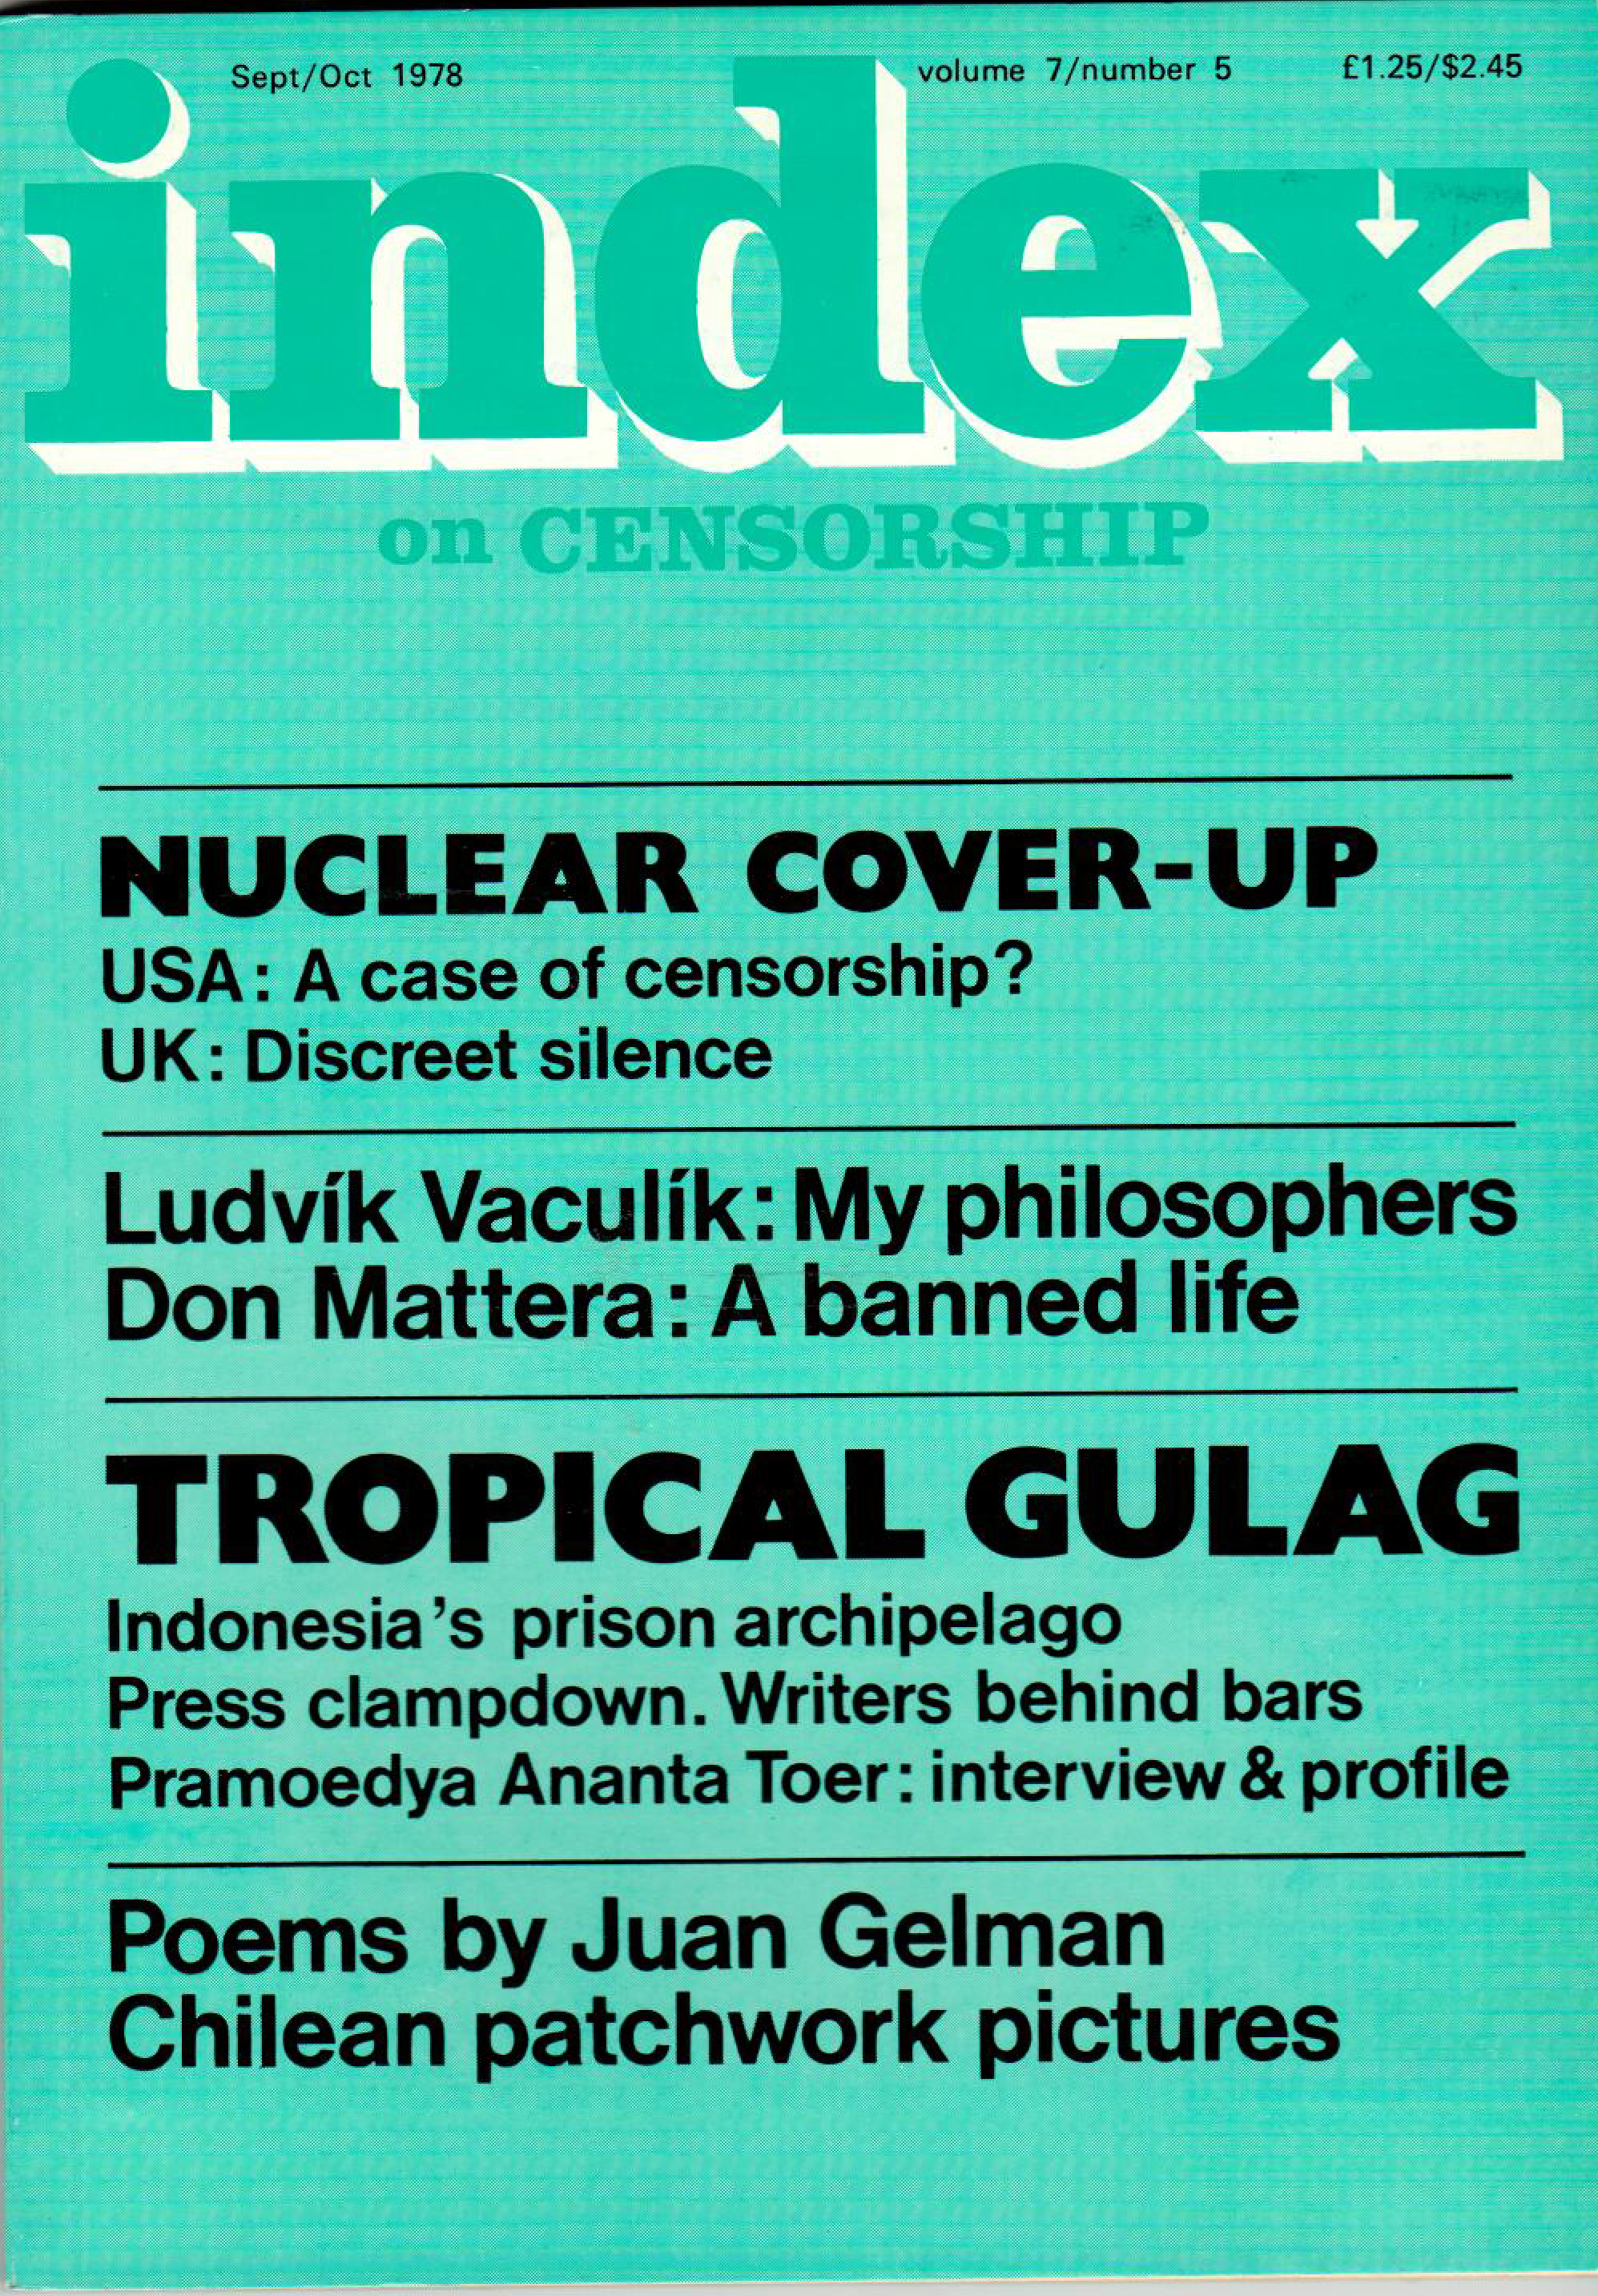 Nuclear cover-up, the September 1978 issue of Index on Censorship magazine